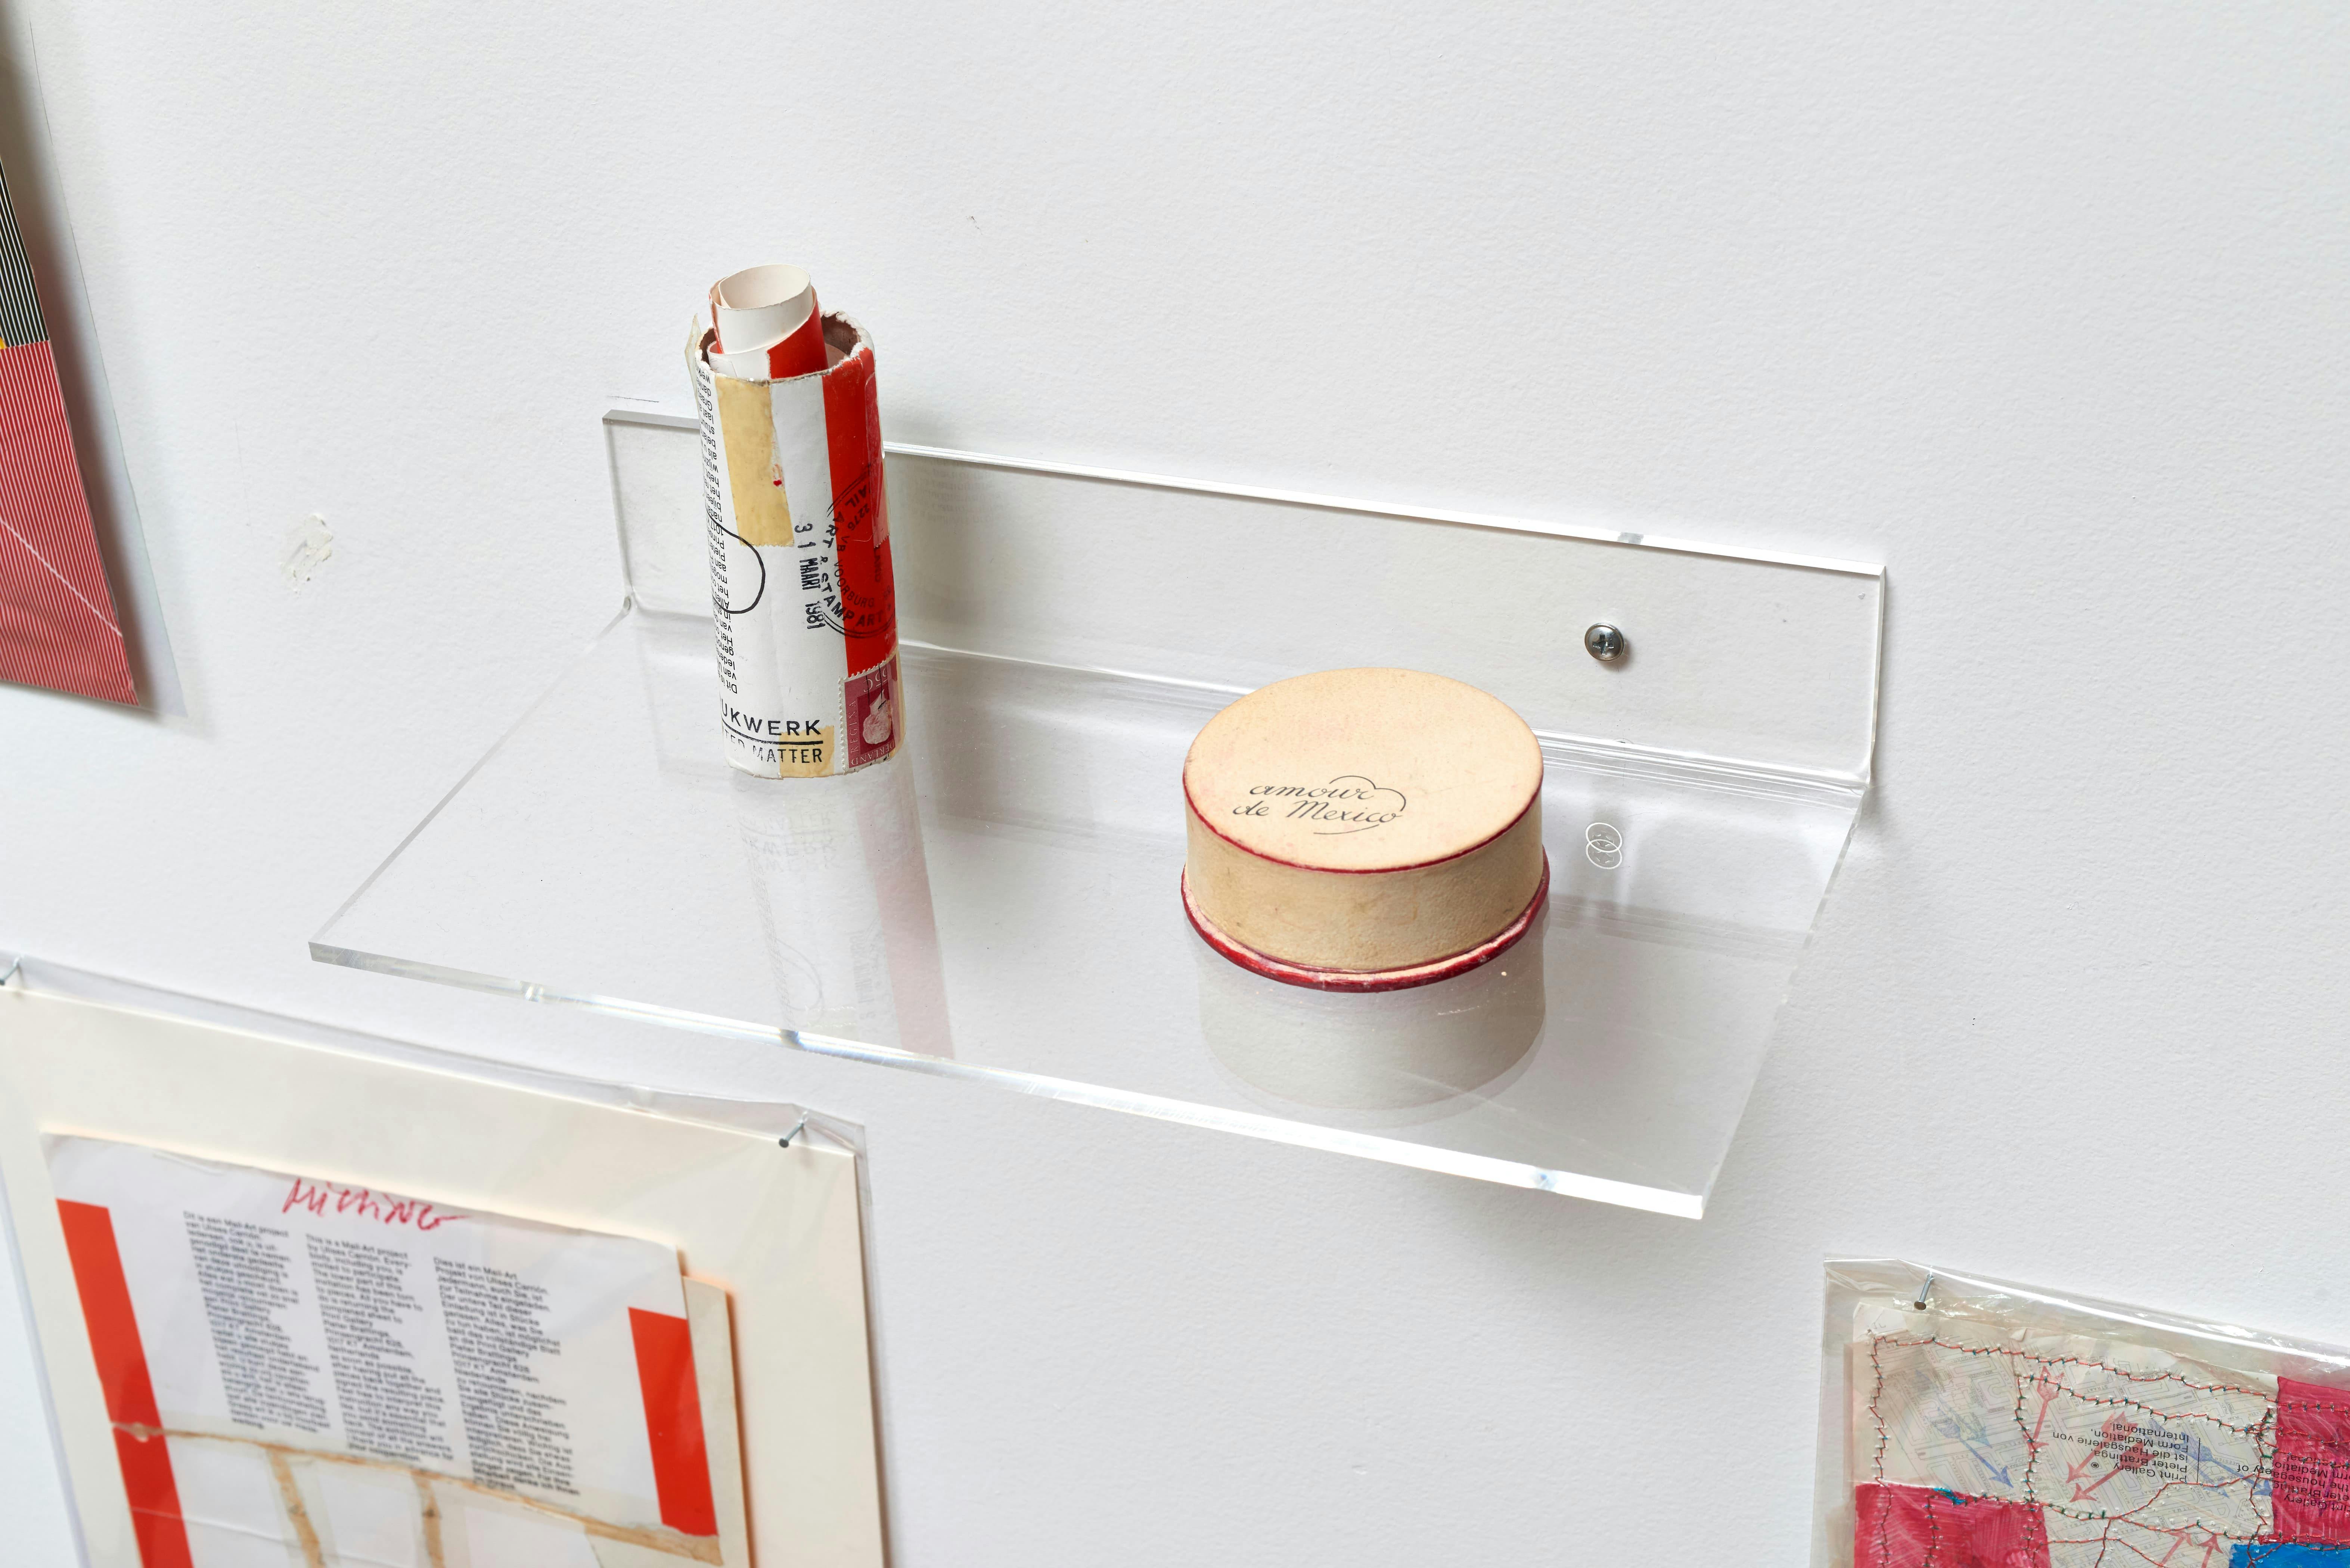 Close up view of a powder compact and rolled up paper positioned on a clear, wall-mounted shelf.